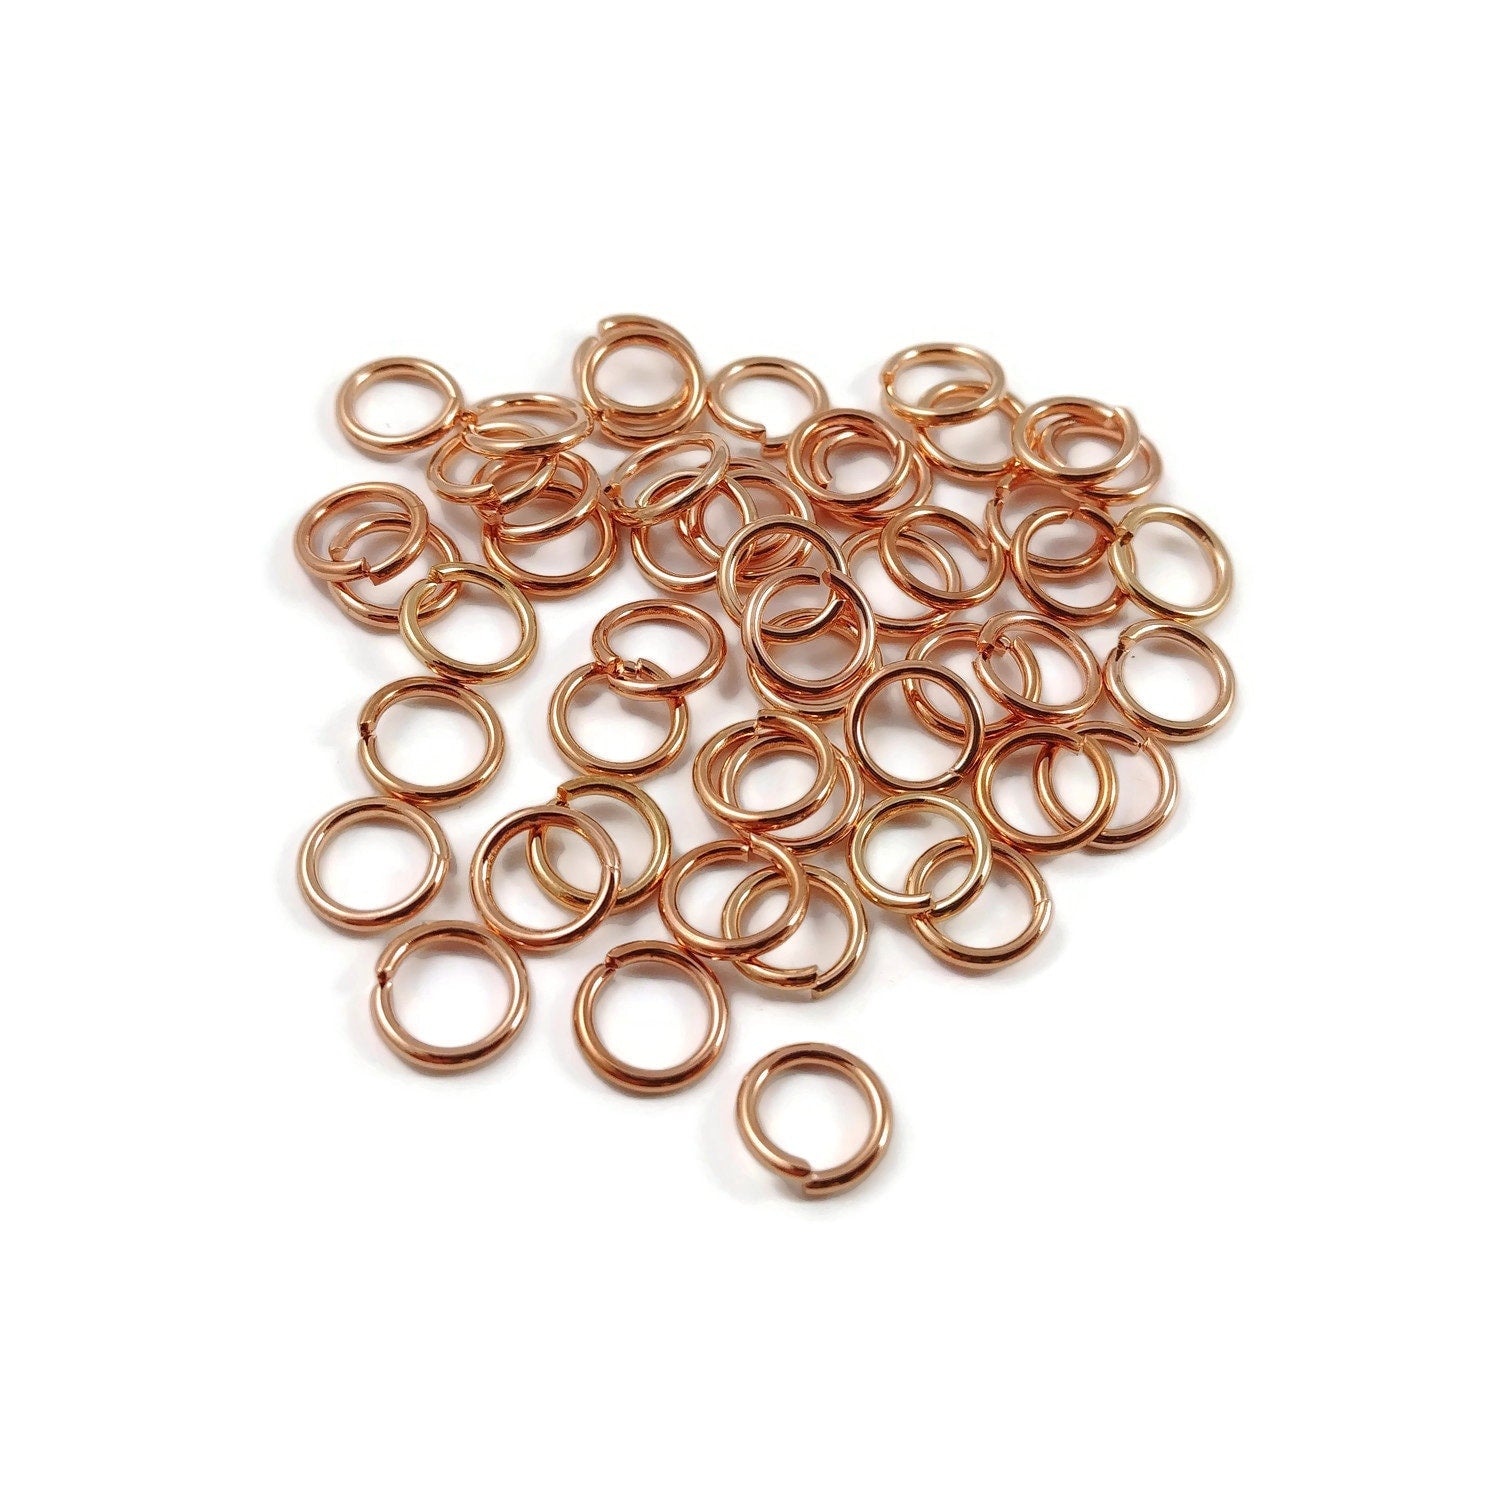 Stainless steel jump rings, Gold rose jumprings, 7mm or 8mm open jump rings, Hypoallergenic jewelry supplies